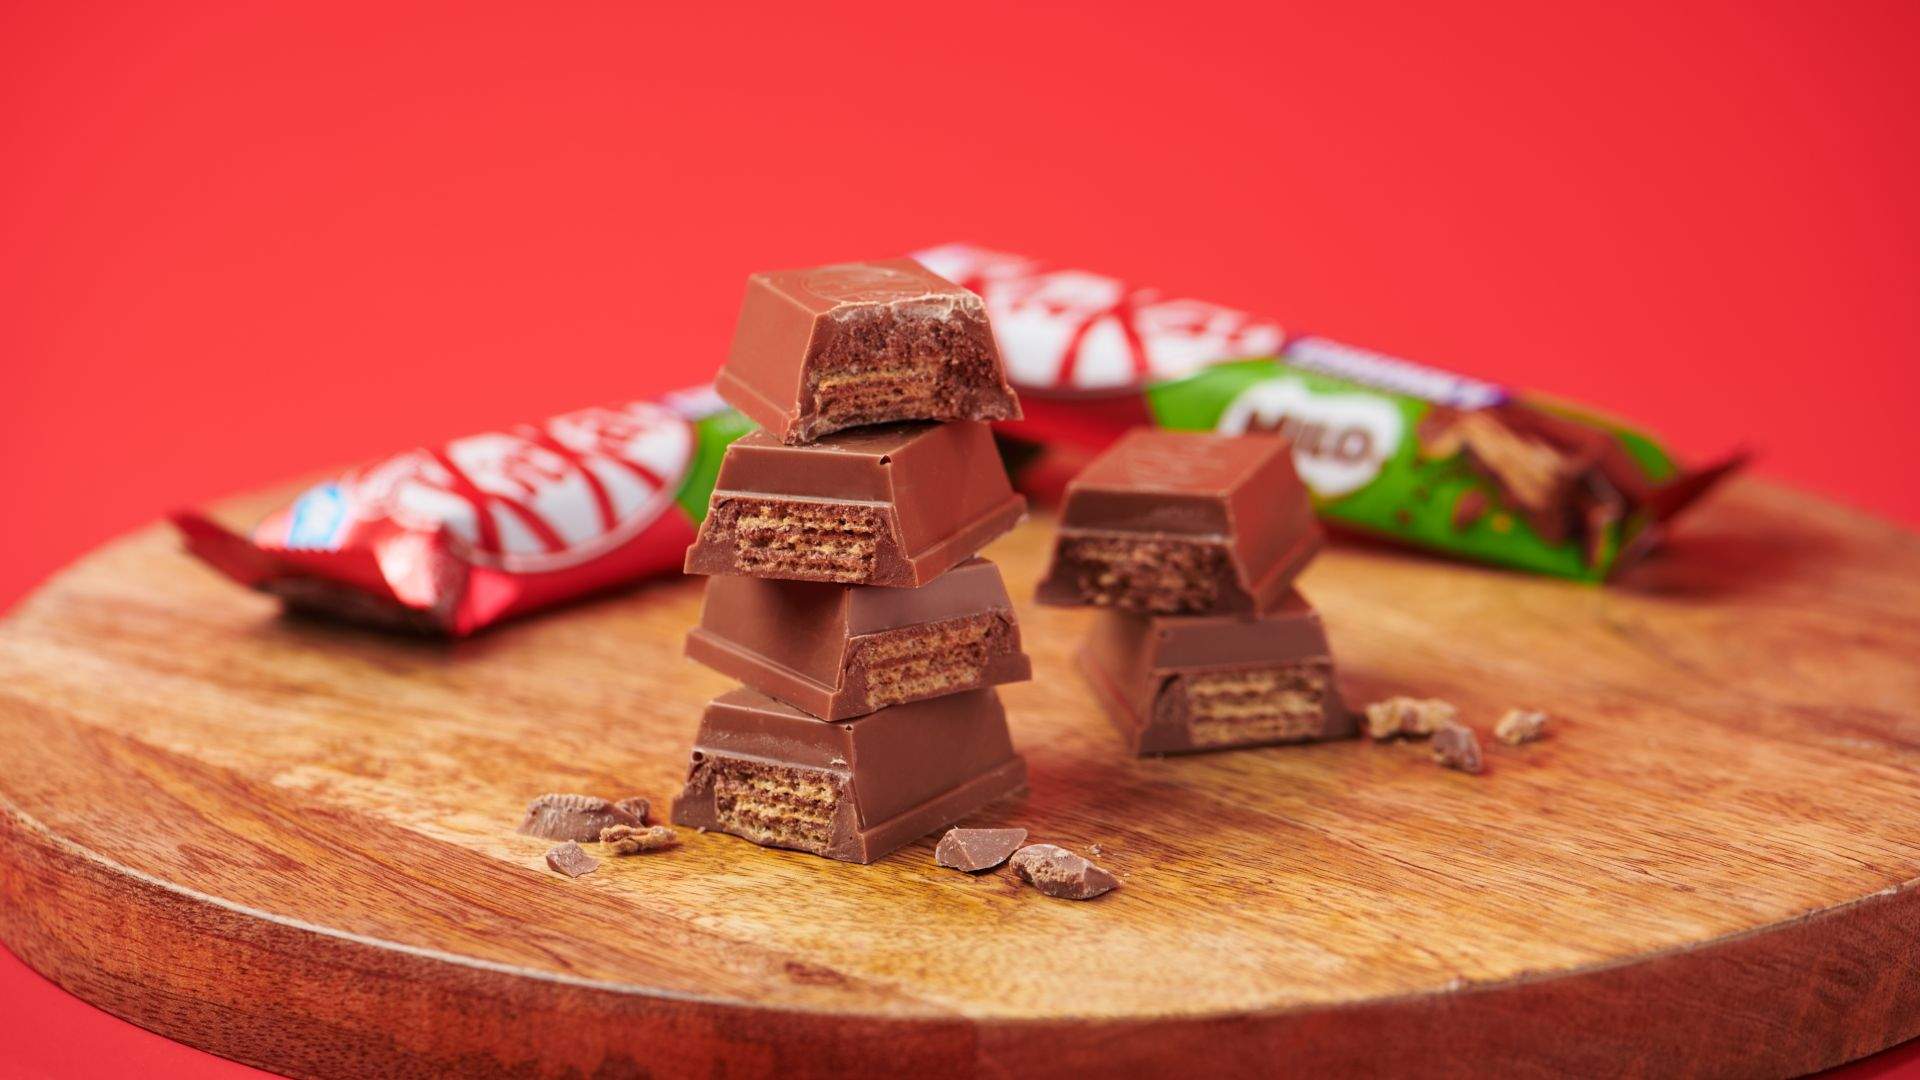 KitKat Has Released the Milo Chocolate Bars of Your Childhood Dreams